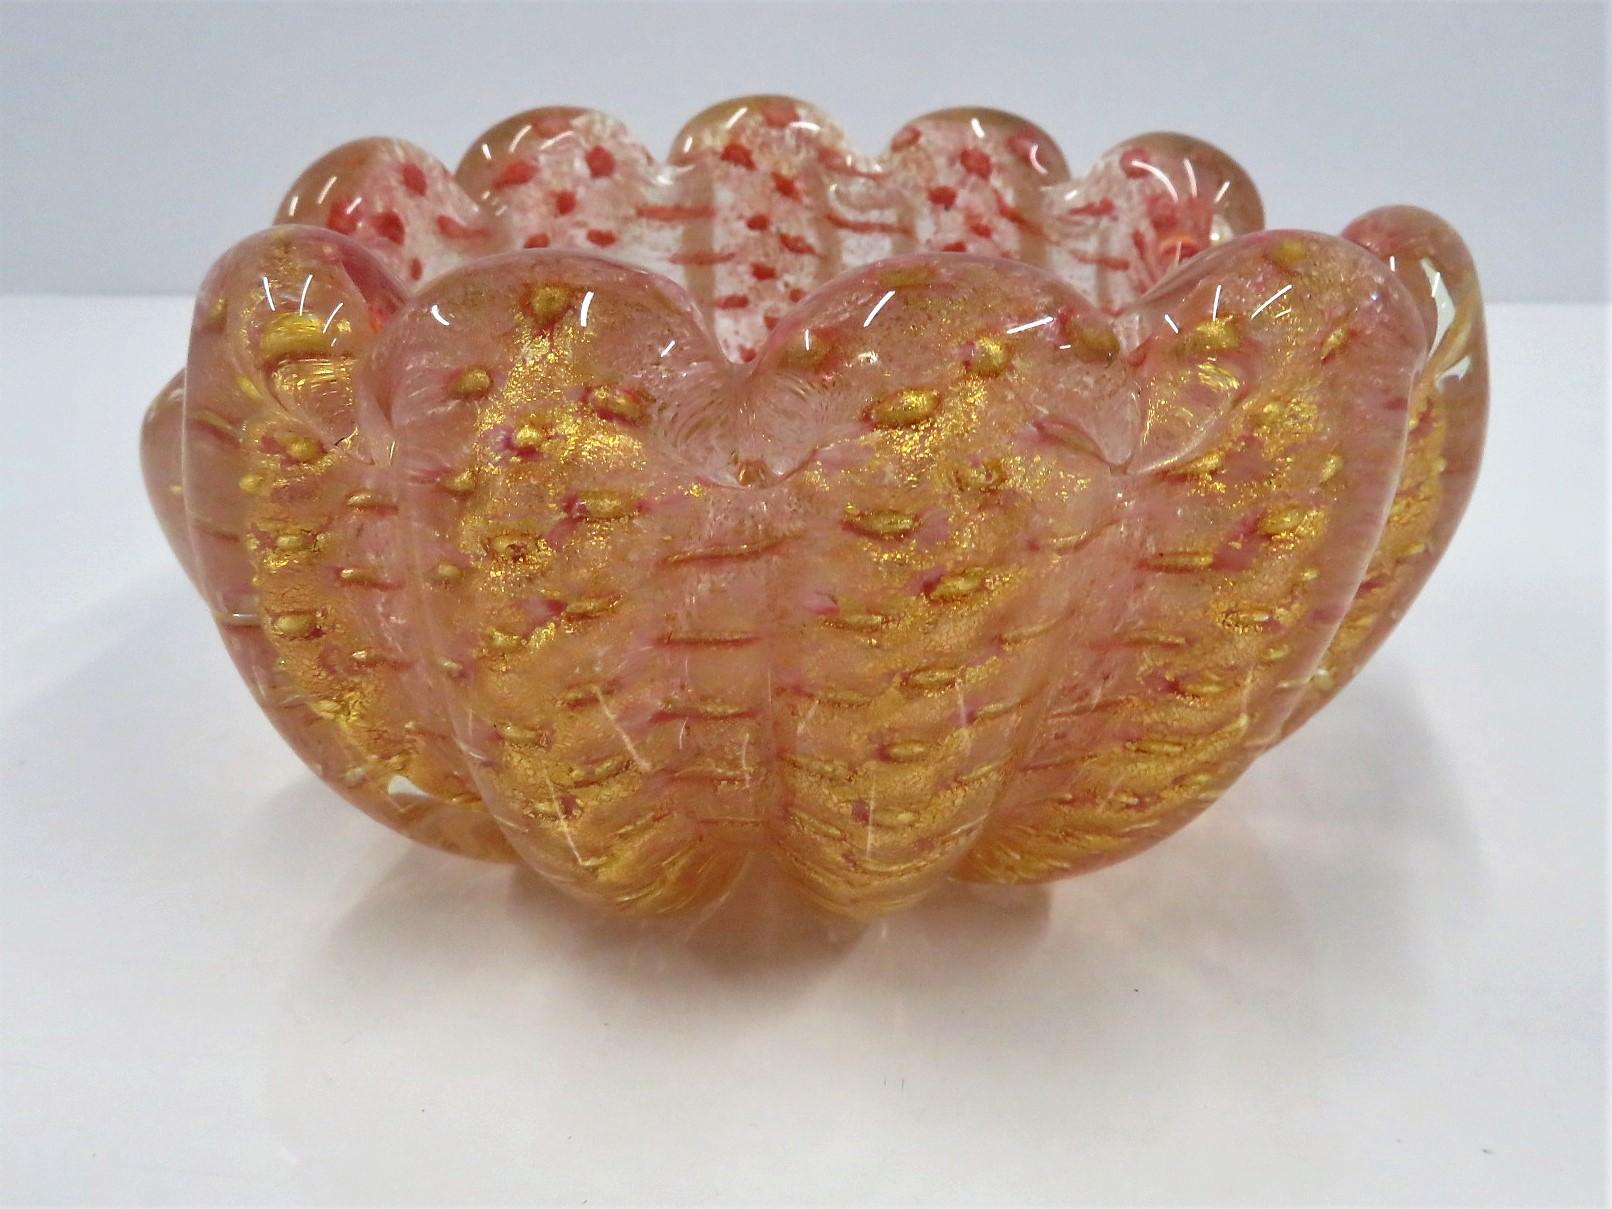 Exquisite 1950s bubbly creation in blown glass by Barovier Toso. Most likely by Ercole Barovier, it is a lobed vessel with pink and gold infusions called Coronato d'Oro Bullicante. A rich Murano masterpiece.
Measurements:  6 inches deep x 6 7/8